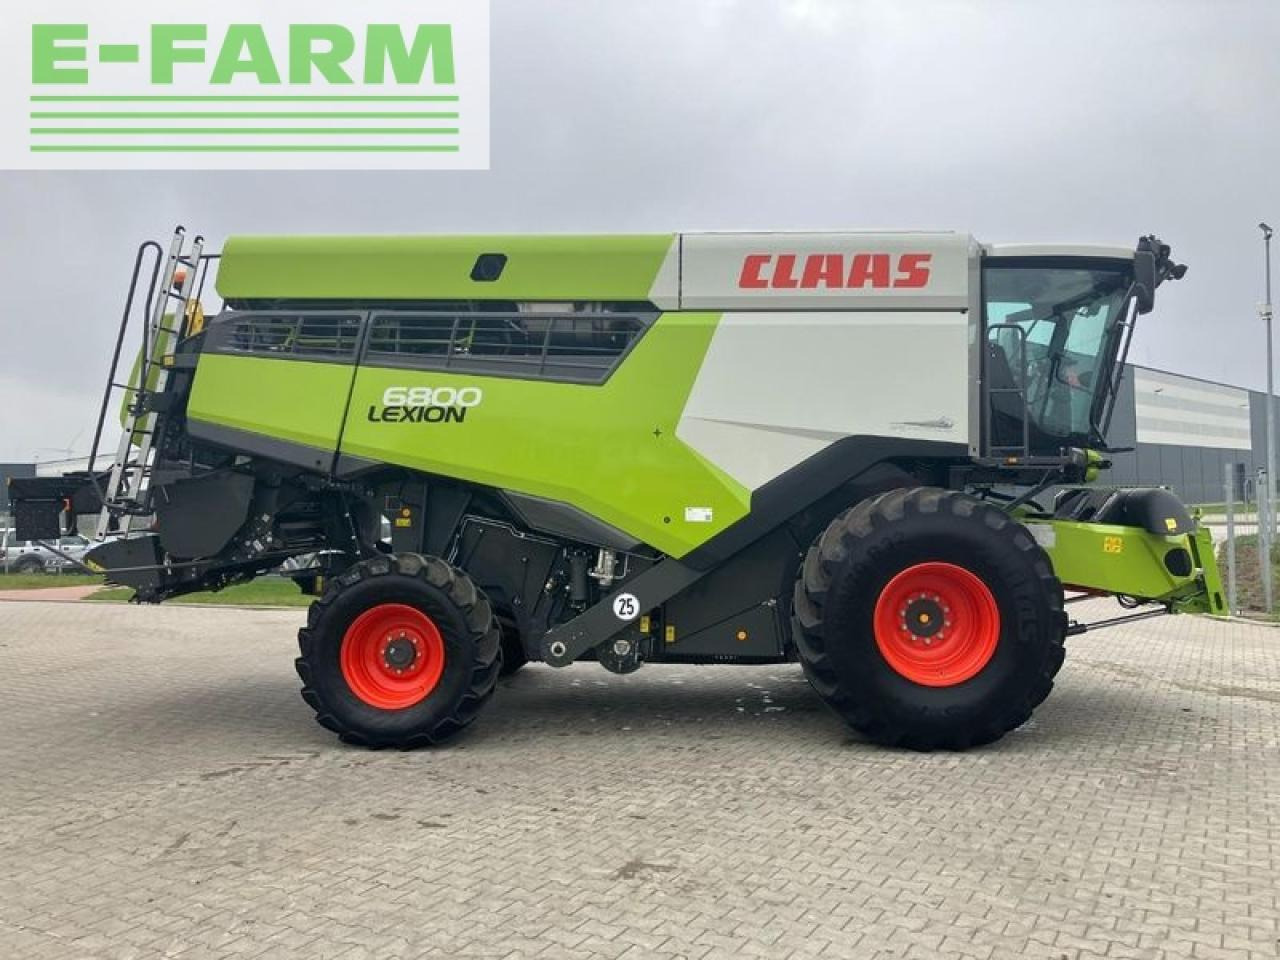 Combine harvester CLAAS lexion 6800: picture 2